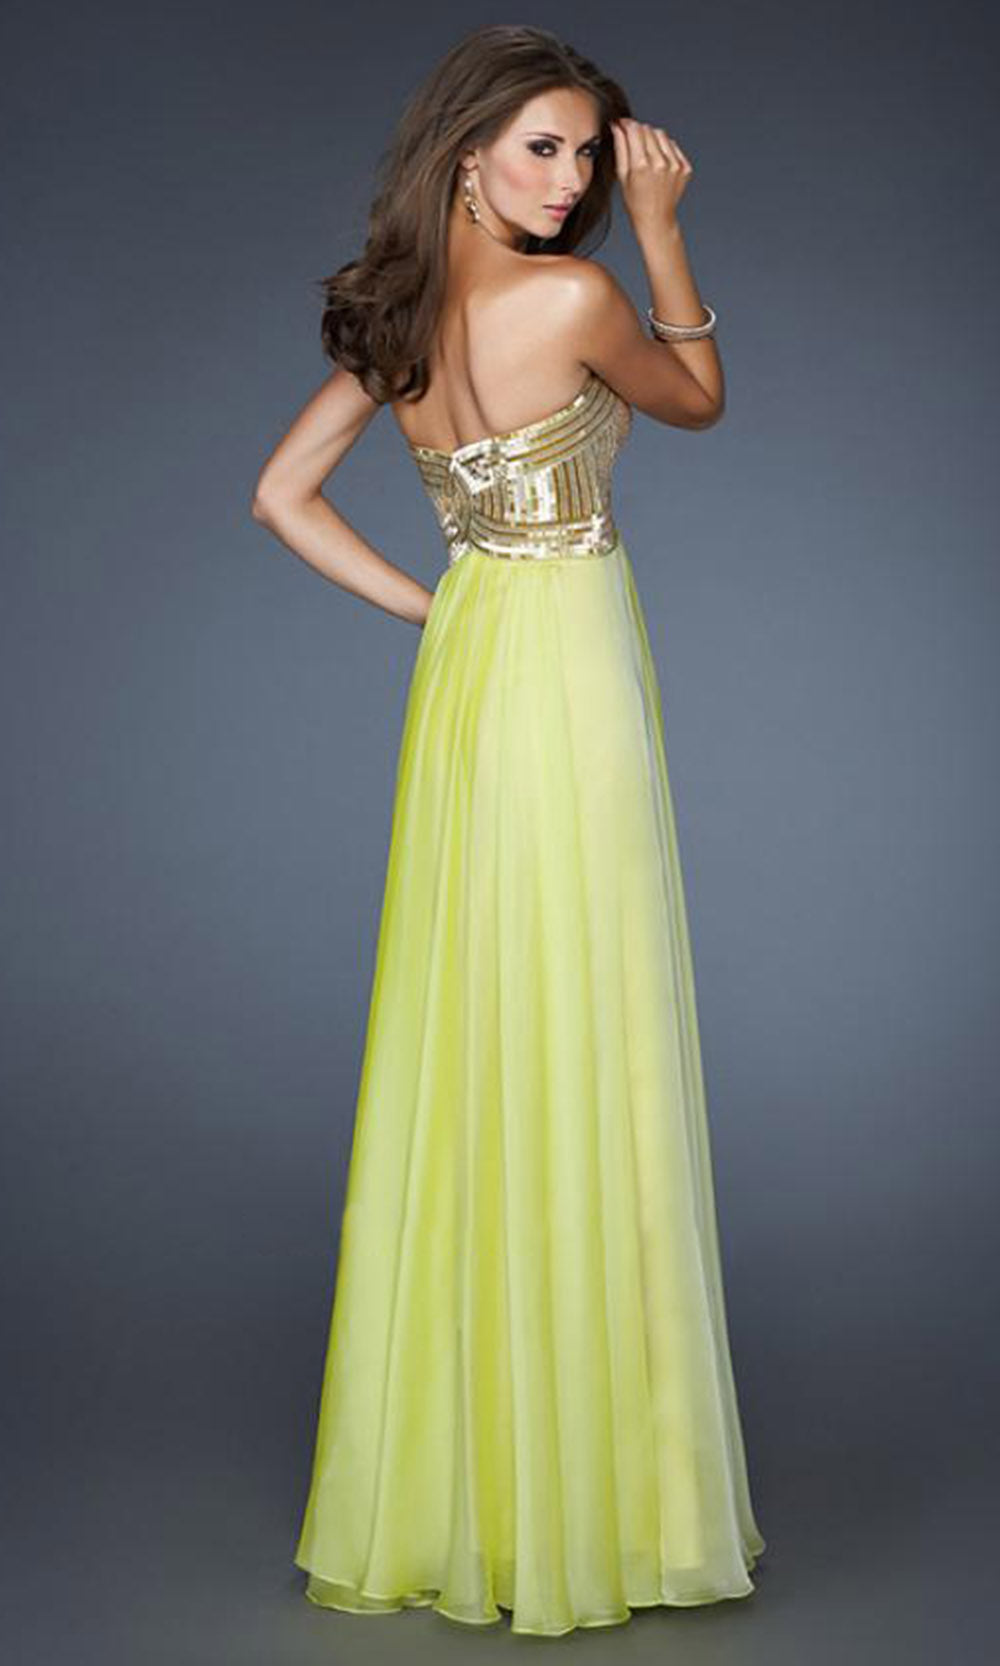 La Femme - 18911 Shimmer Embellished Bodice A-Line Gown In Yellow